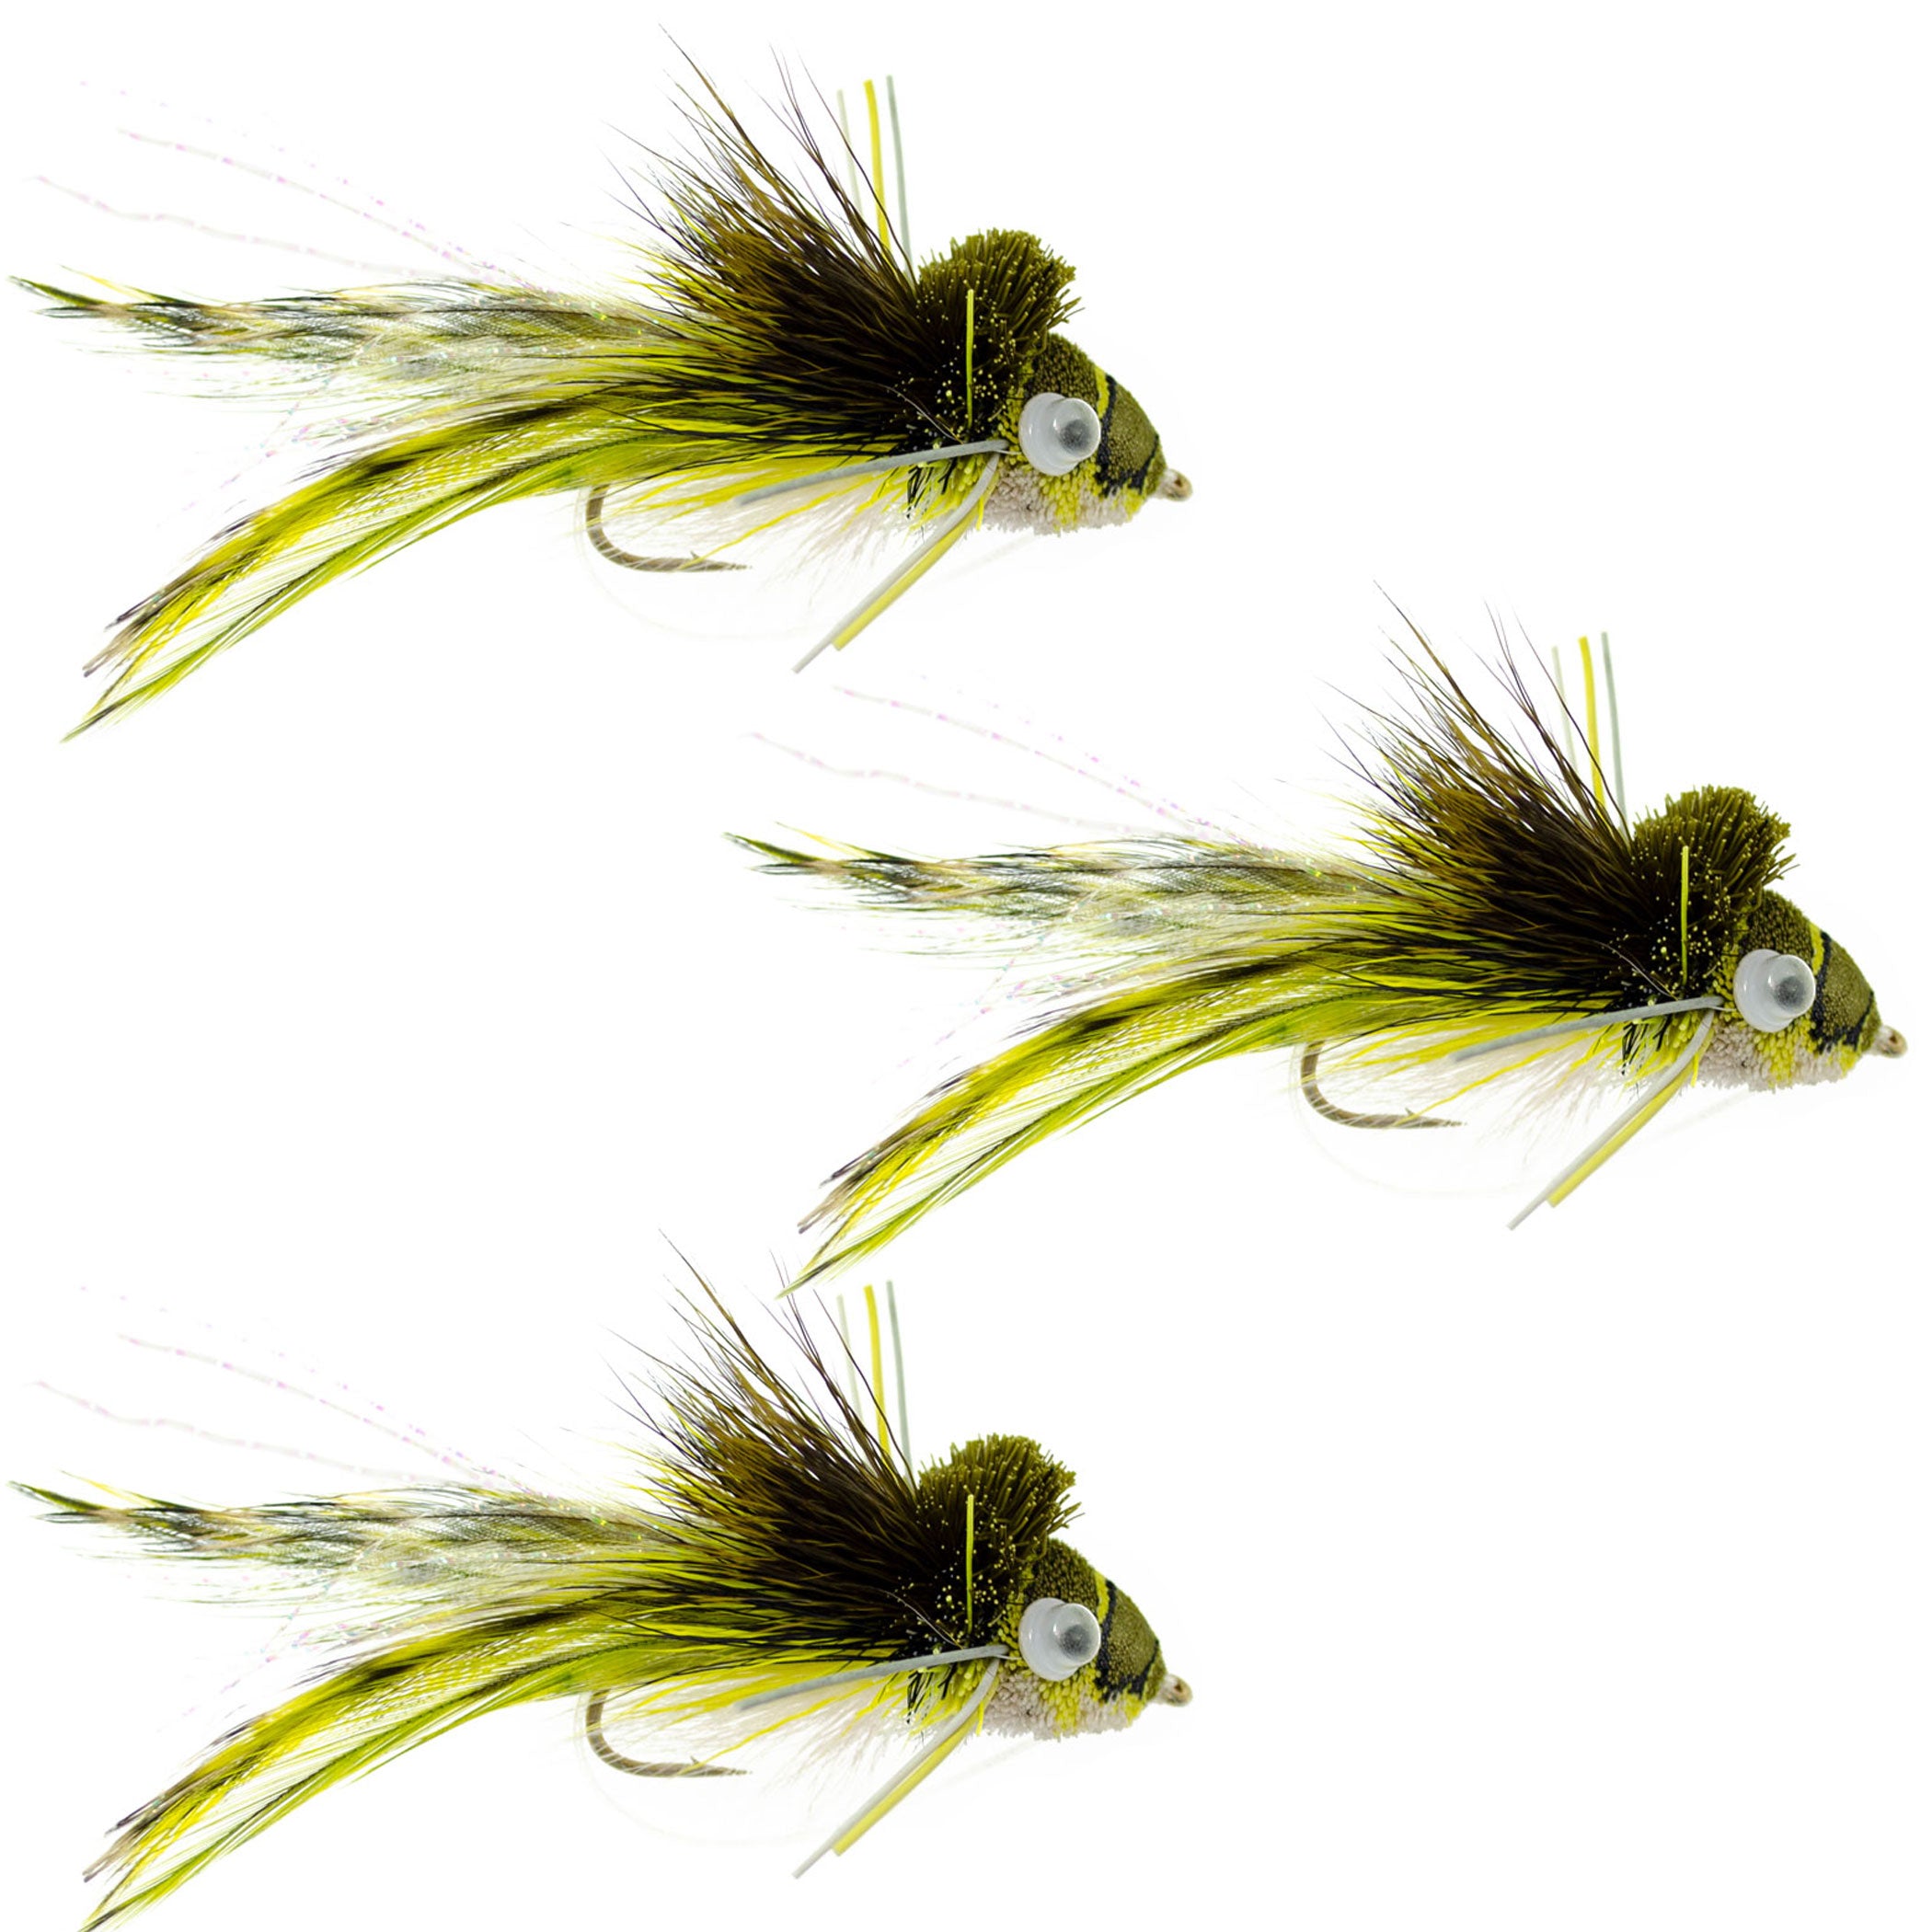 3 Pack Deer Hair Diver Size 4 - Swimming Frog Bass Fly Fishing Bug Wide Gape Bass Hooks With Weed Guard